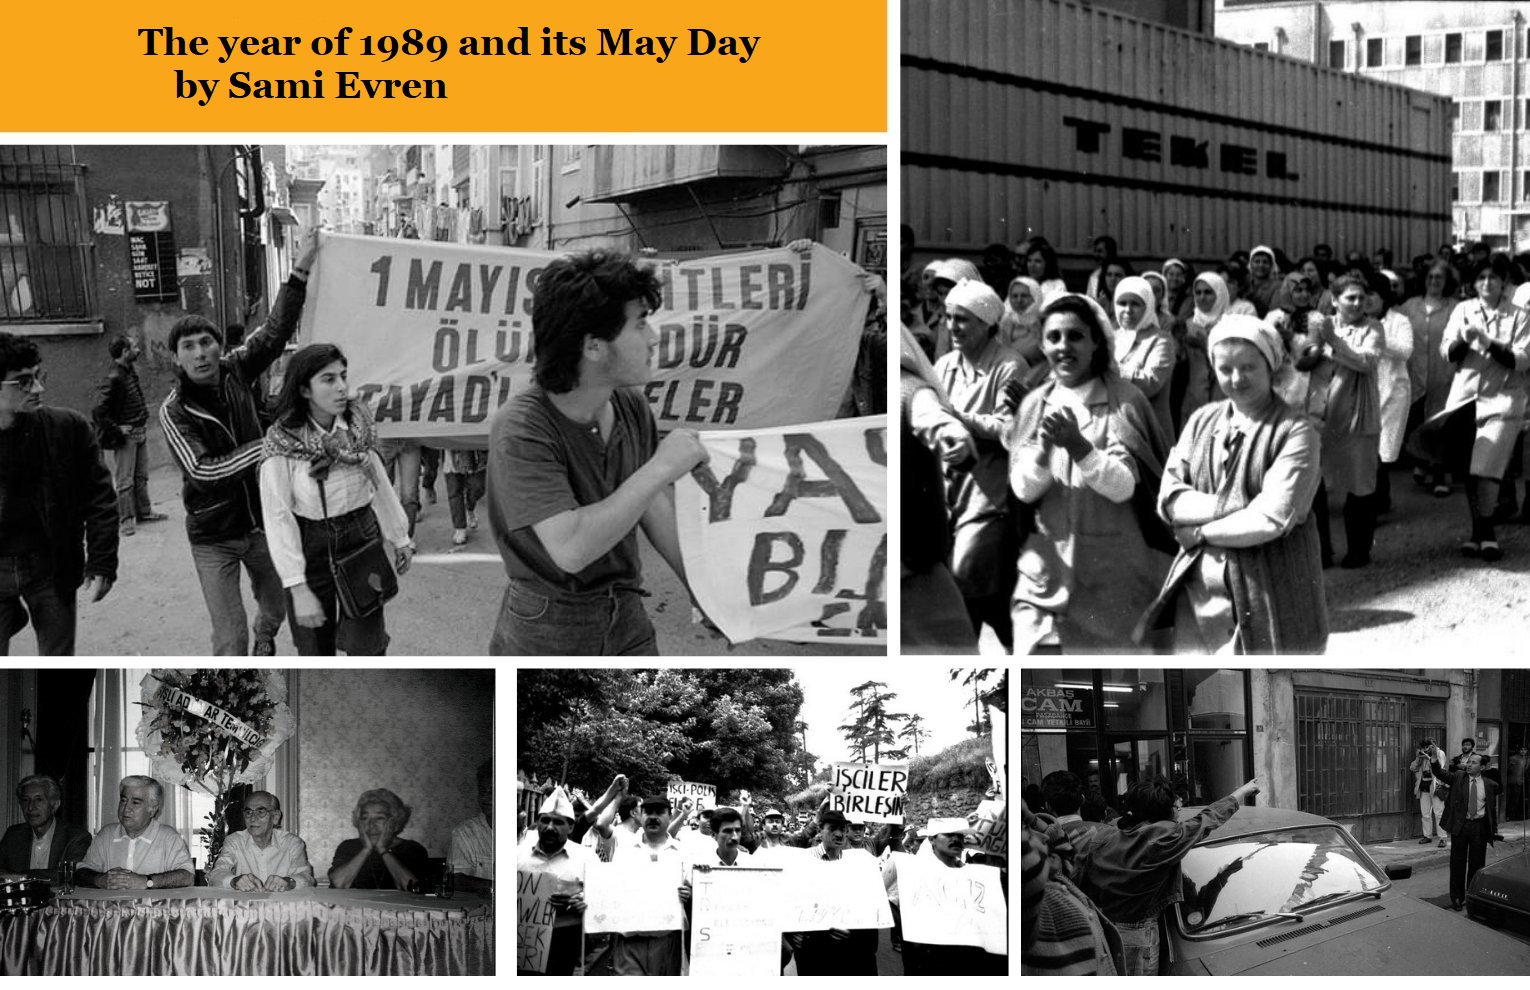 The year of 1989 and the May Day of the year in Taksim